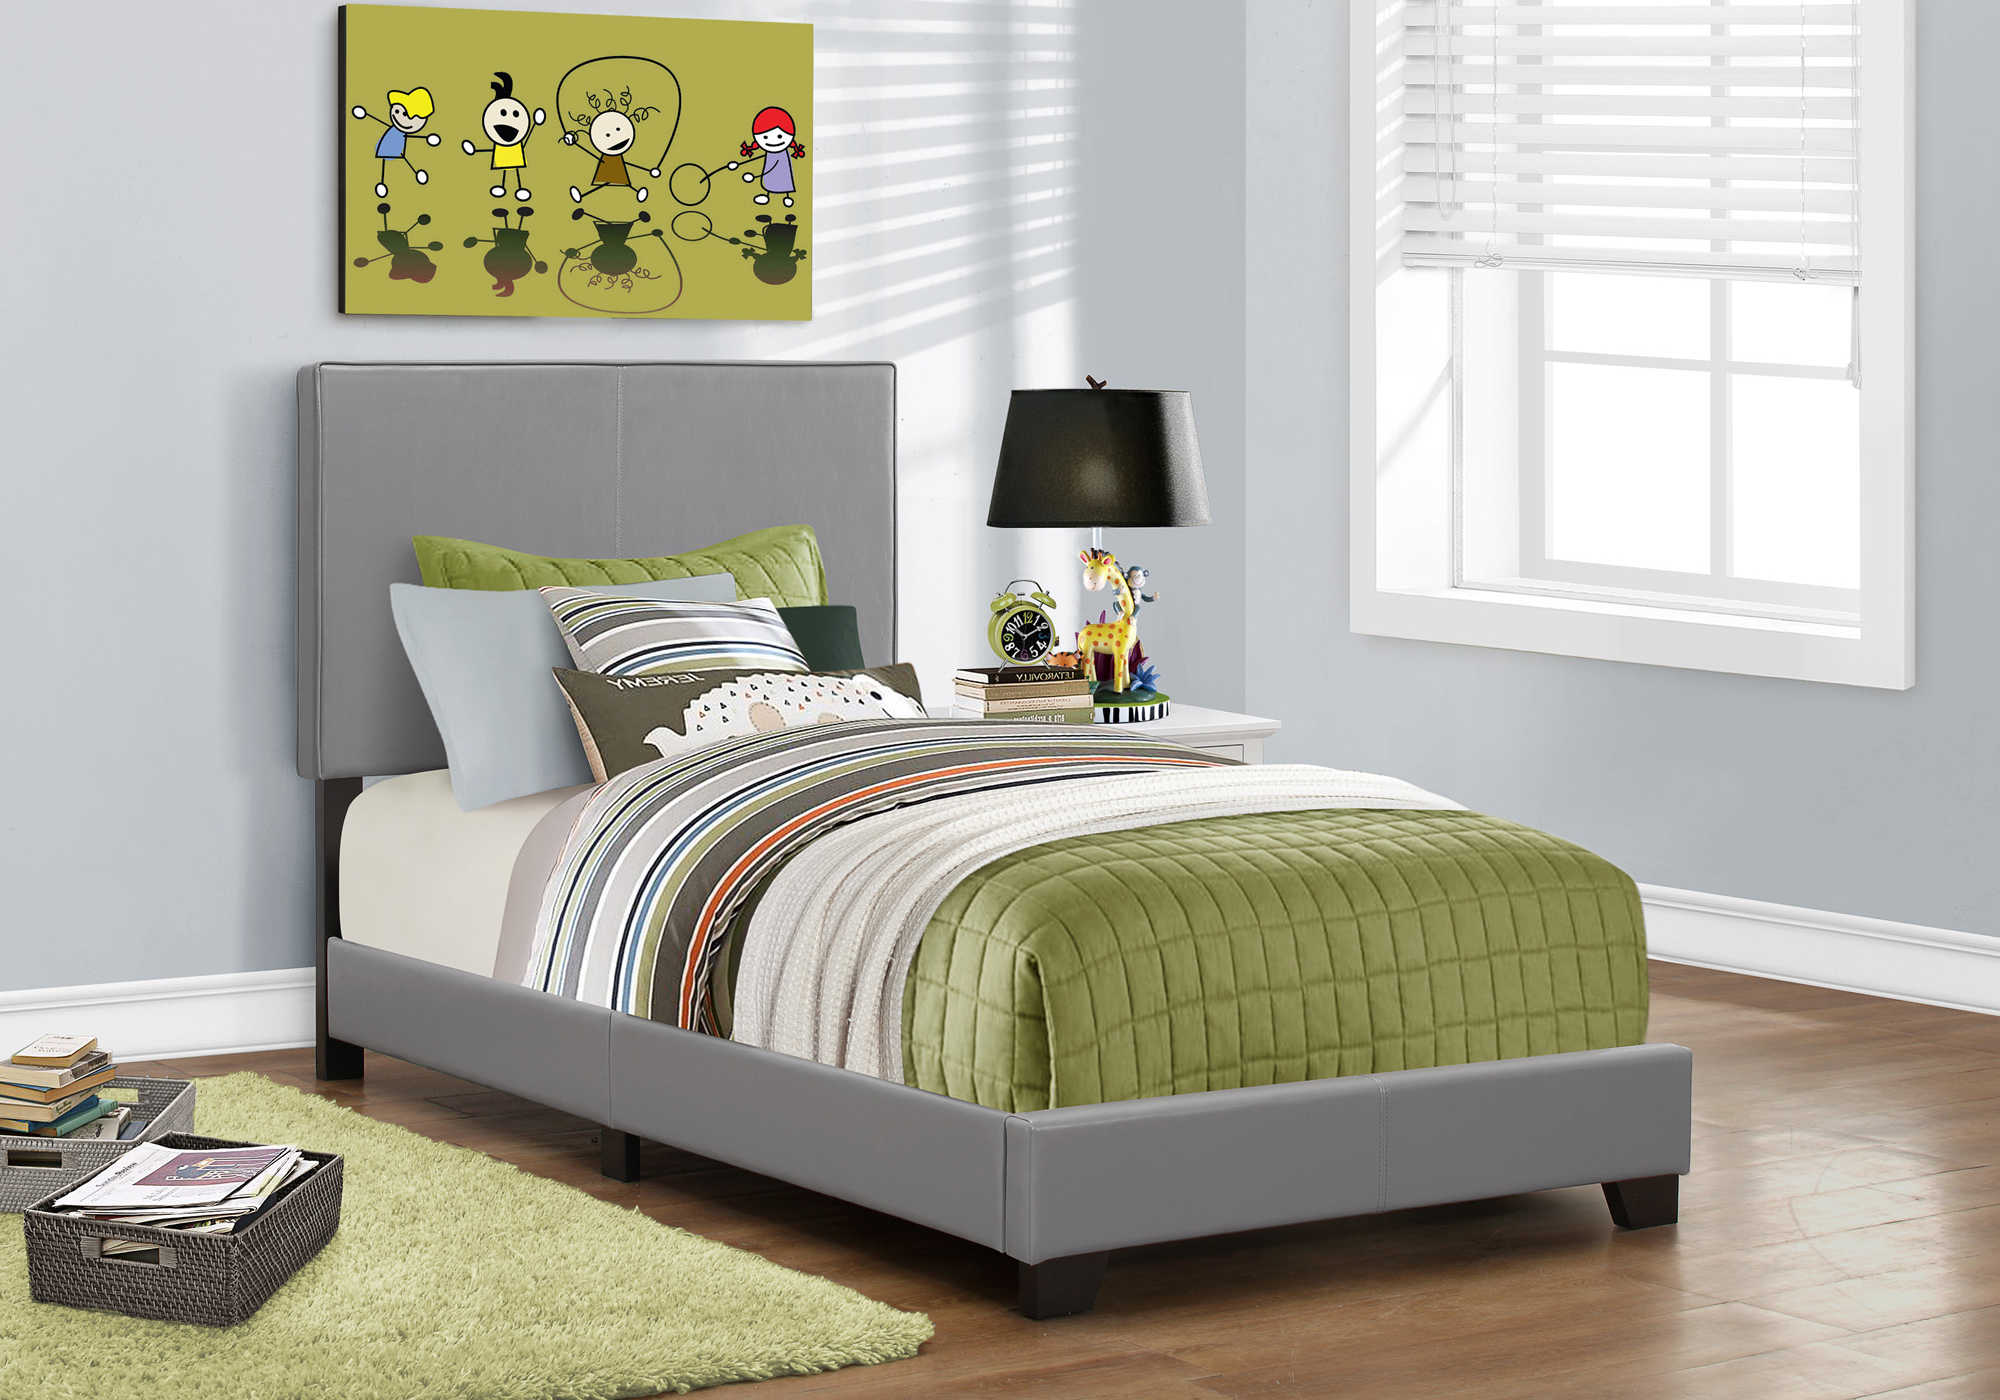 BED - TWIN SIZE / GREY LEATHER-LOOK 